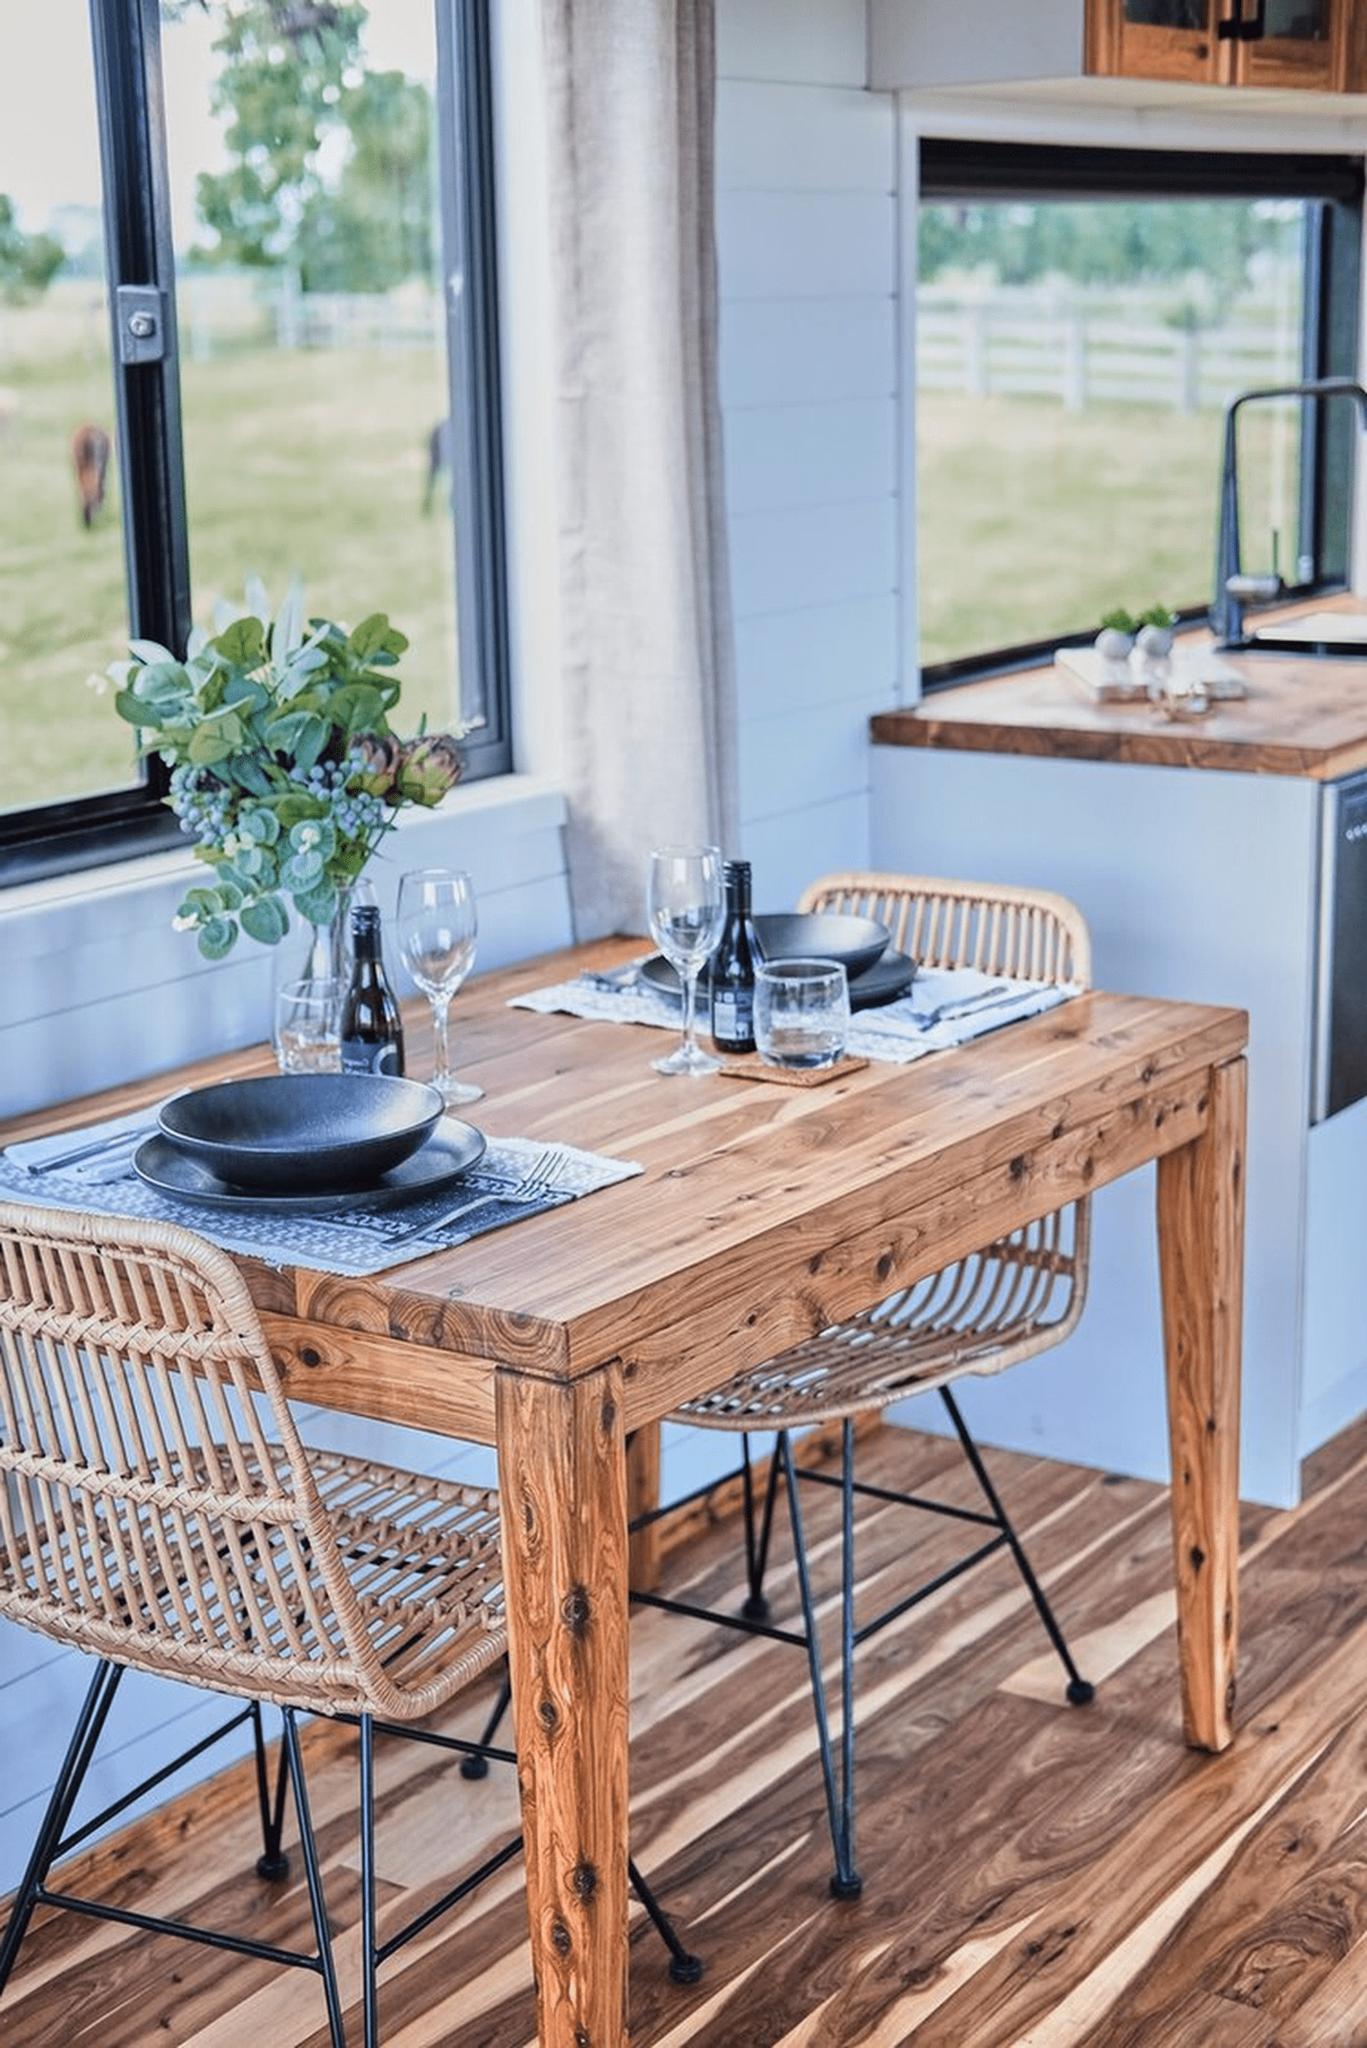 Dining Table - Sojourner v2 by Häuslein Tiny House Co